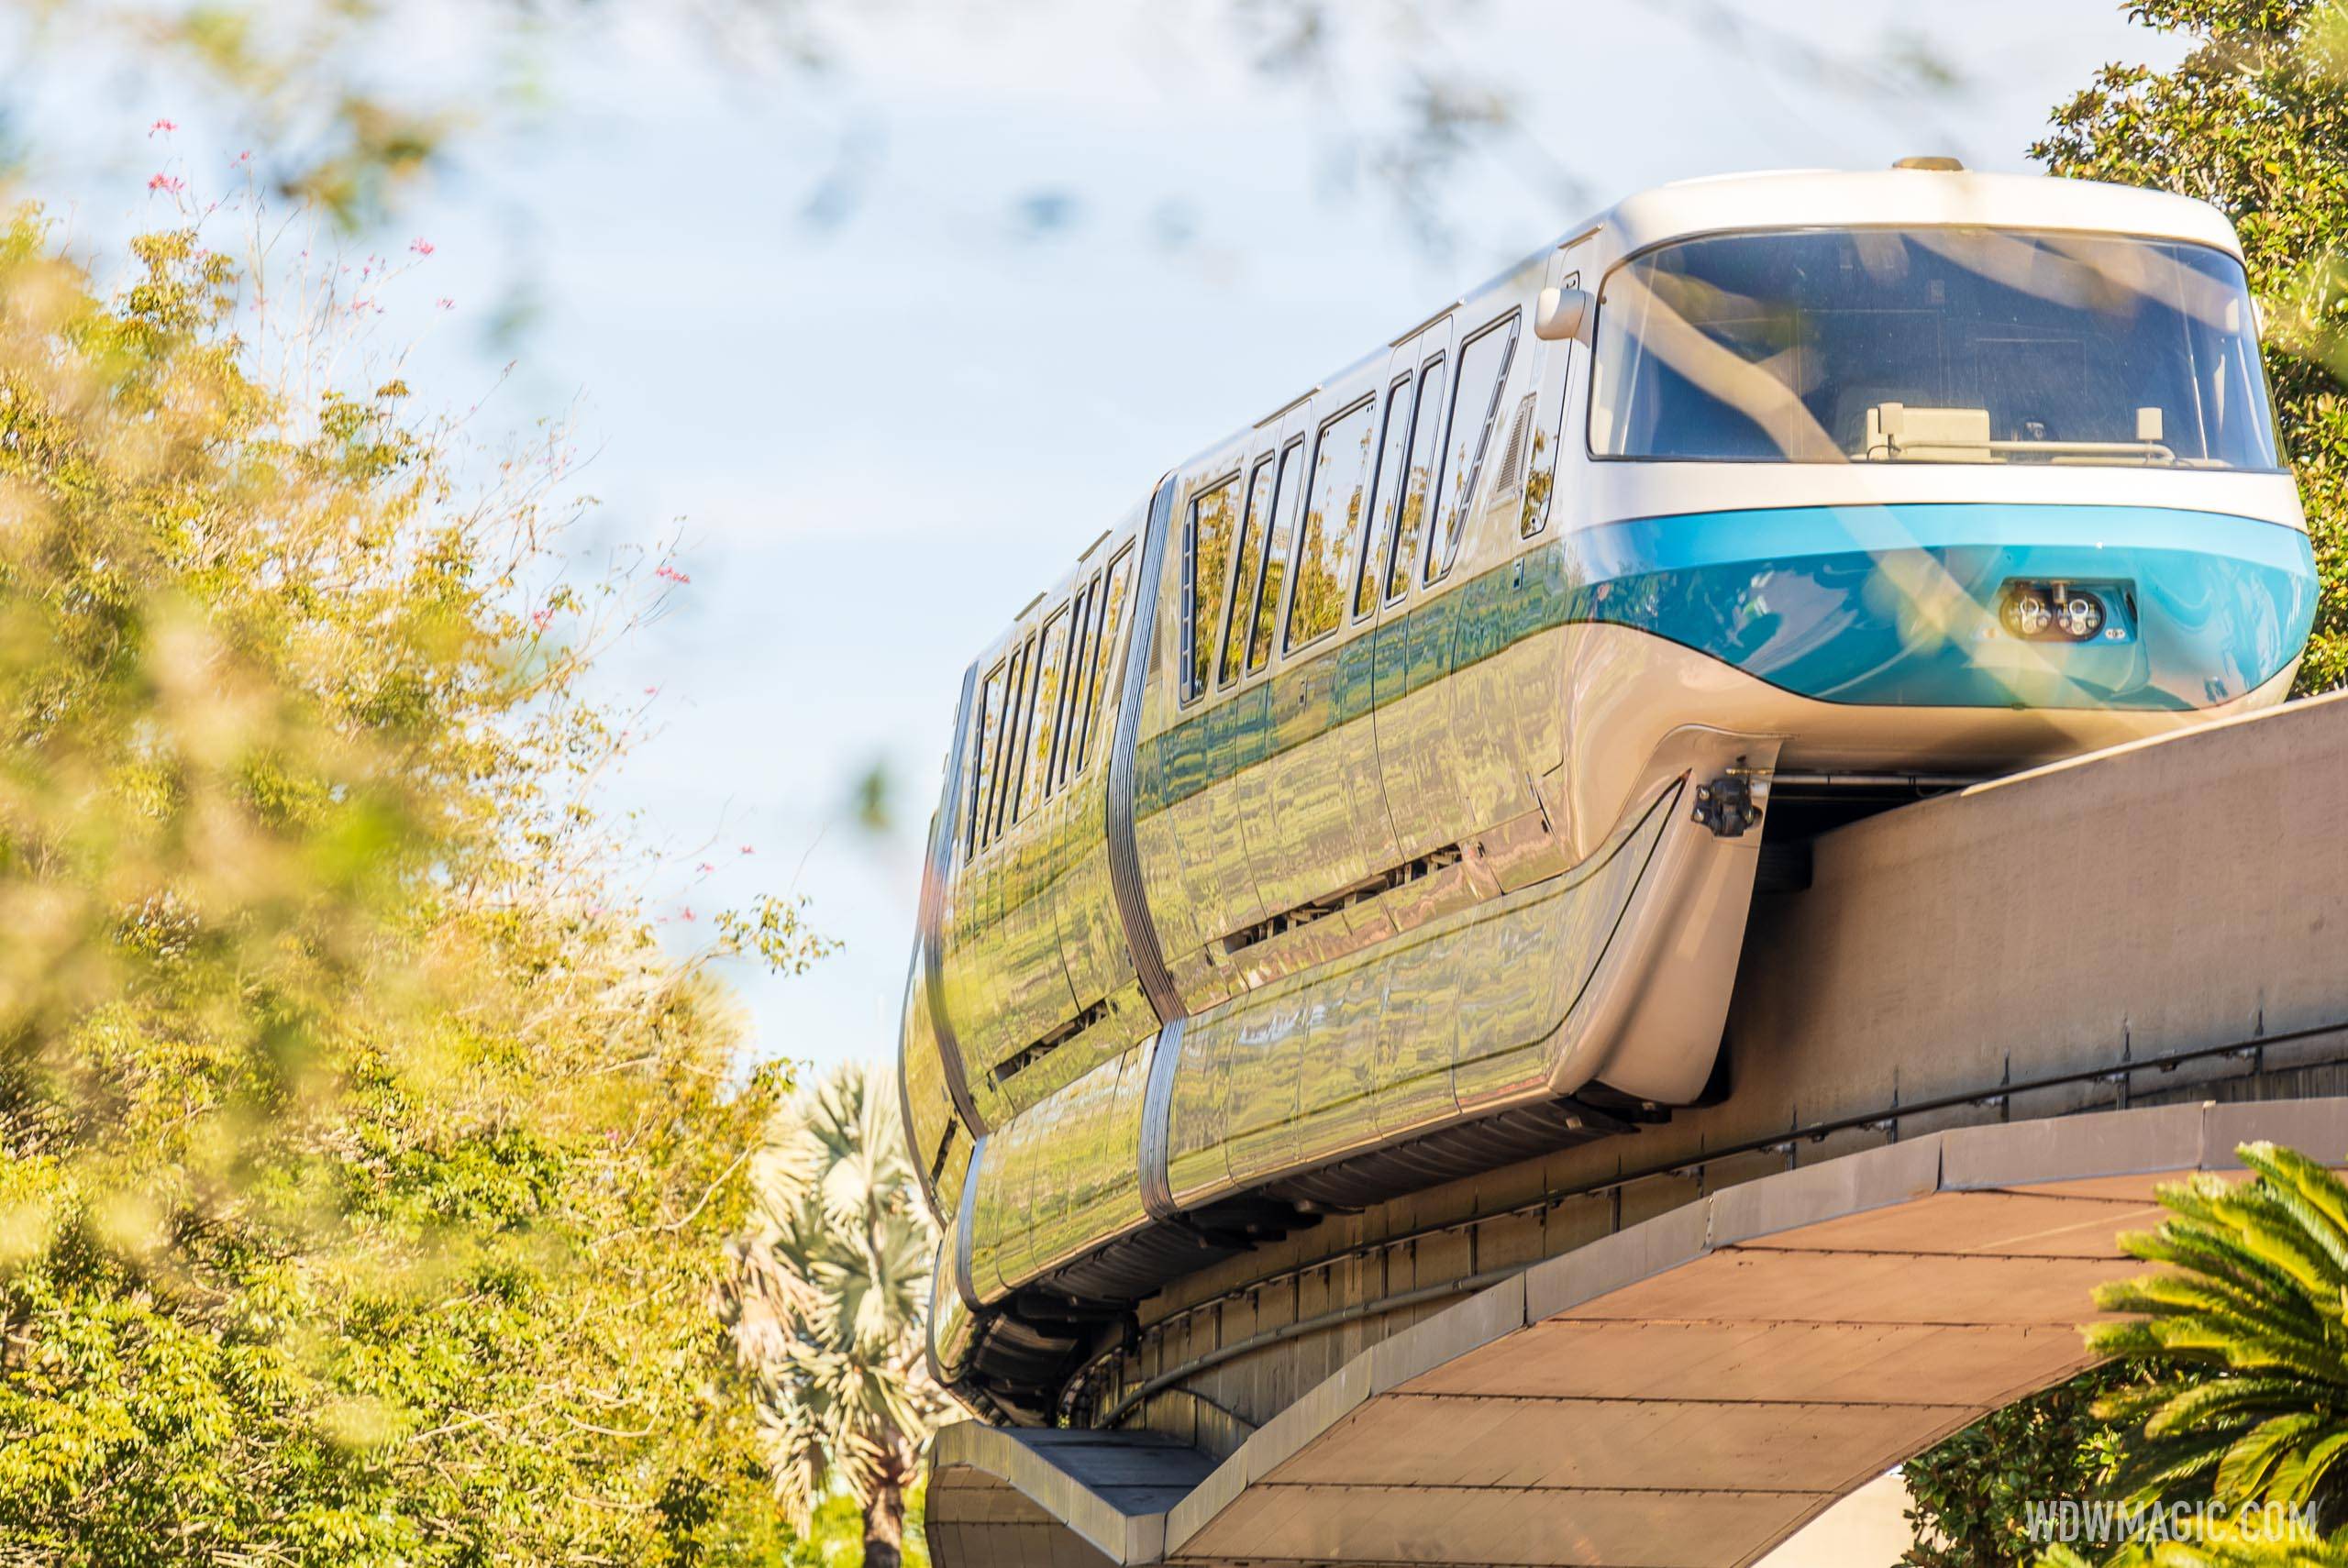 Monorail Teal on the EPCOT beam January 2022